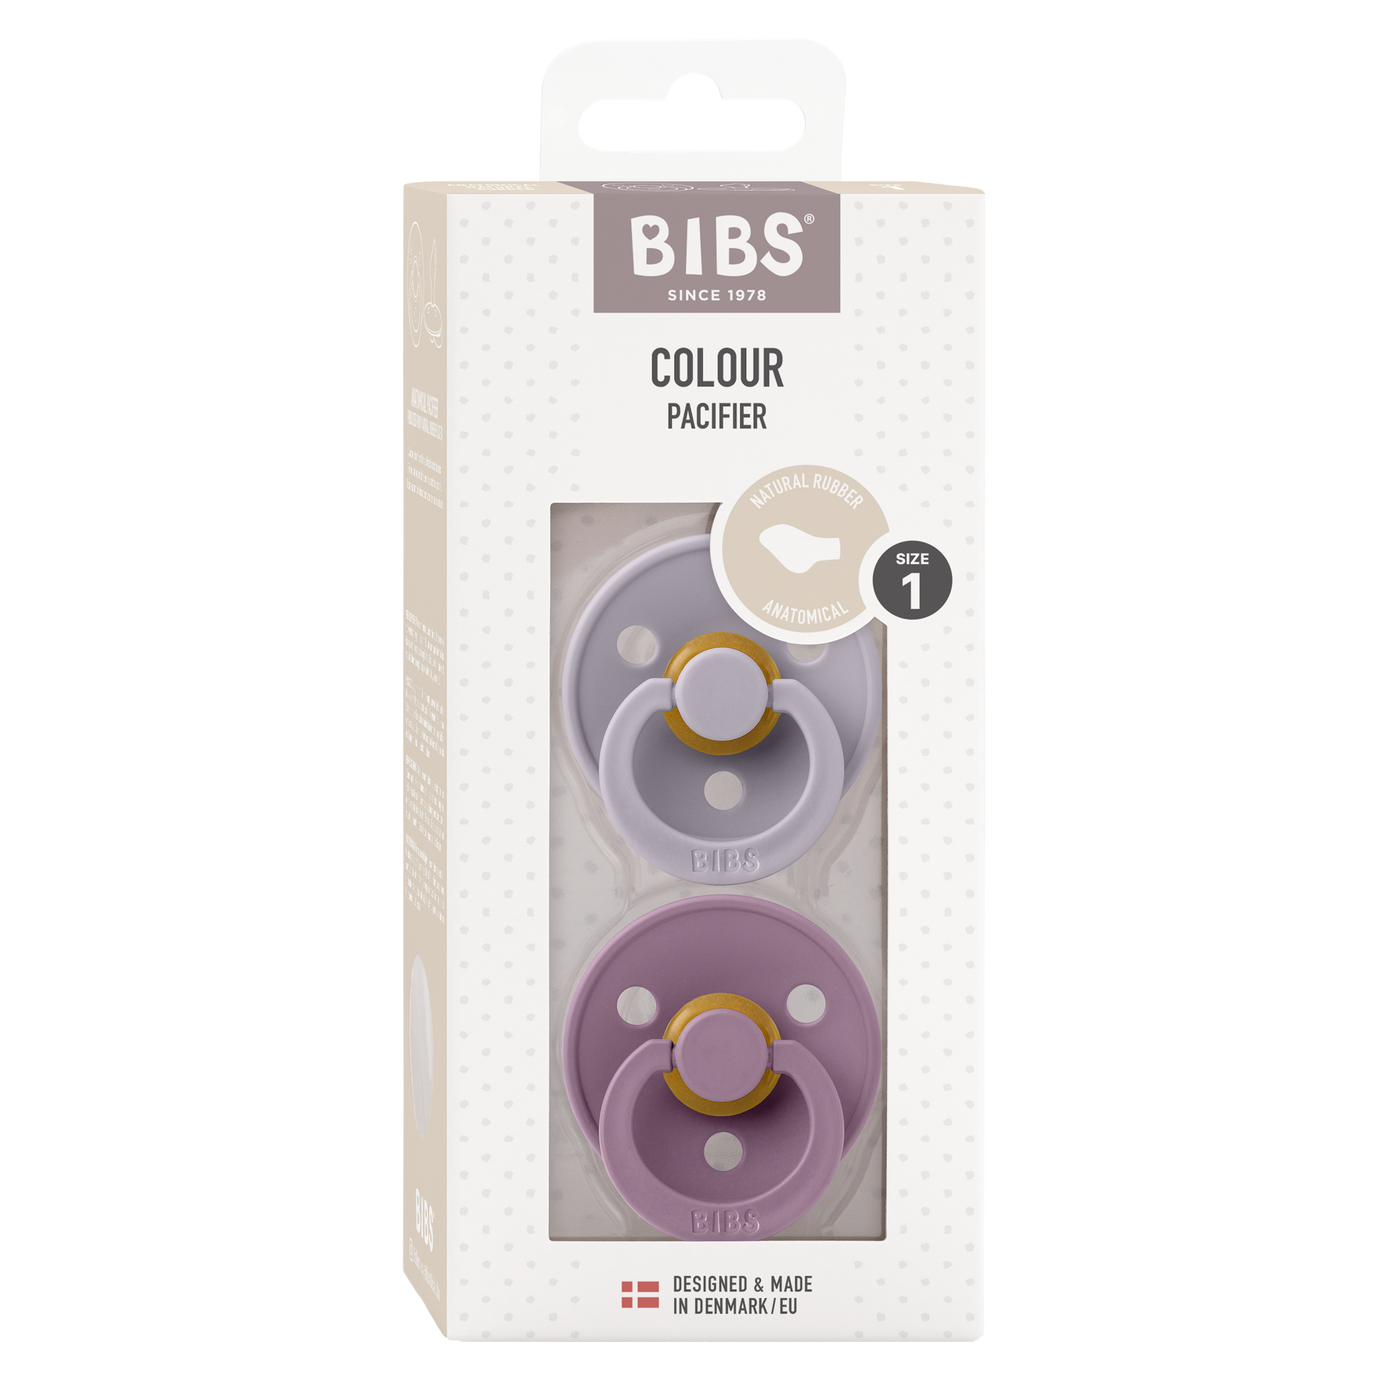 BIBS Colour Anatomical Pacifier - 2 Pack - Fossil Grey/Mauve